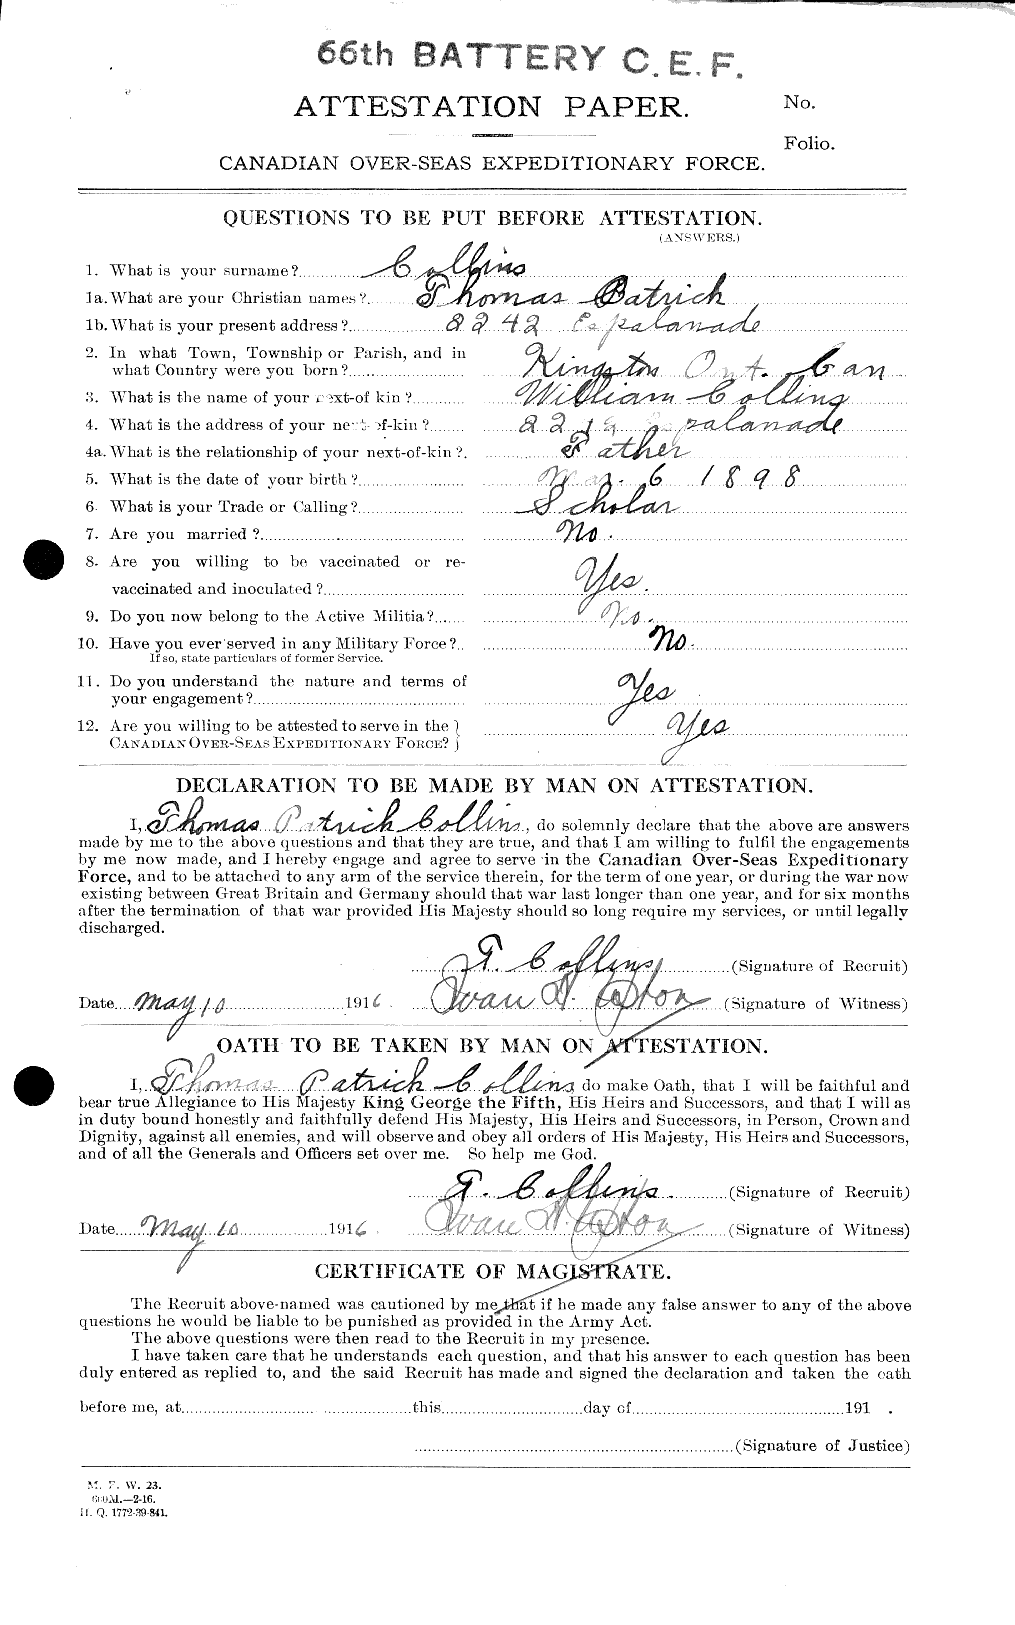 Personnel Records of the First World War - CEF 040670a